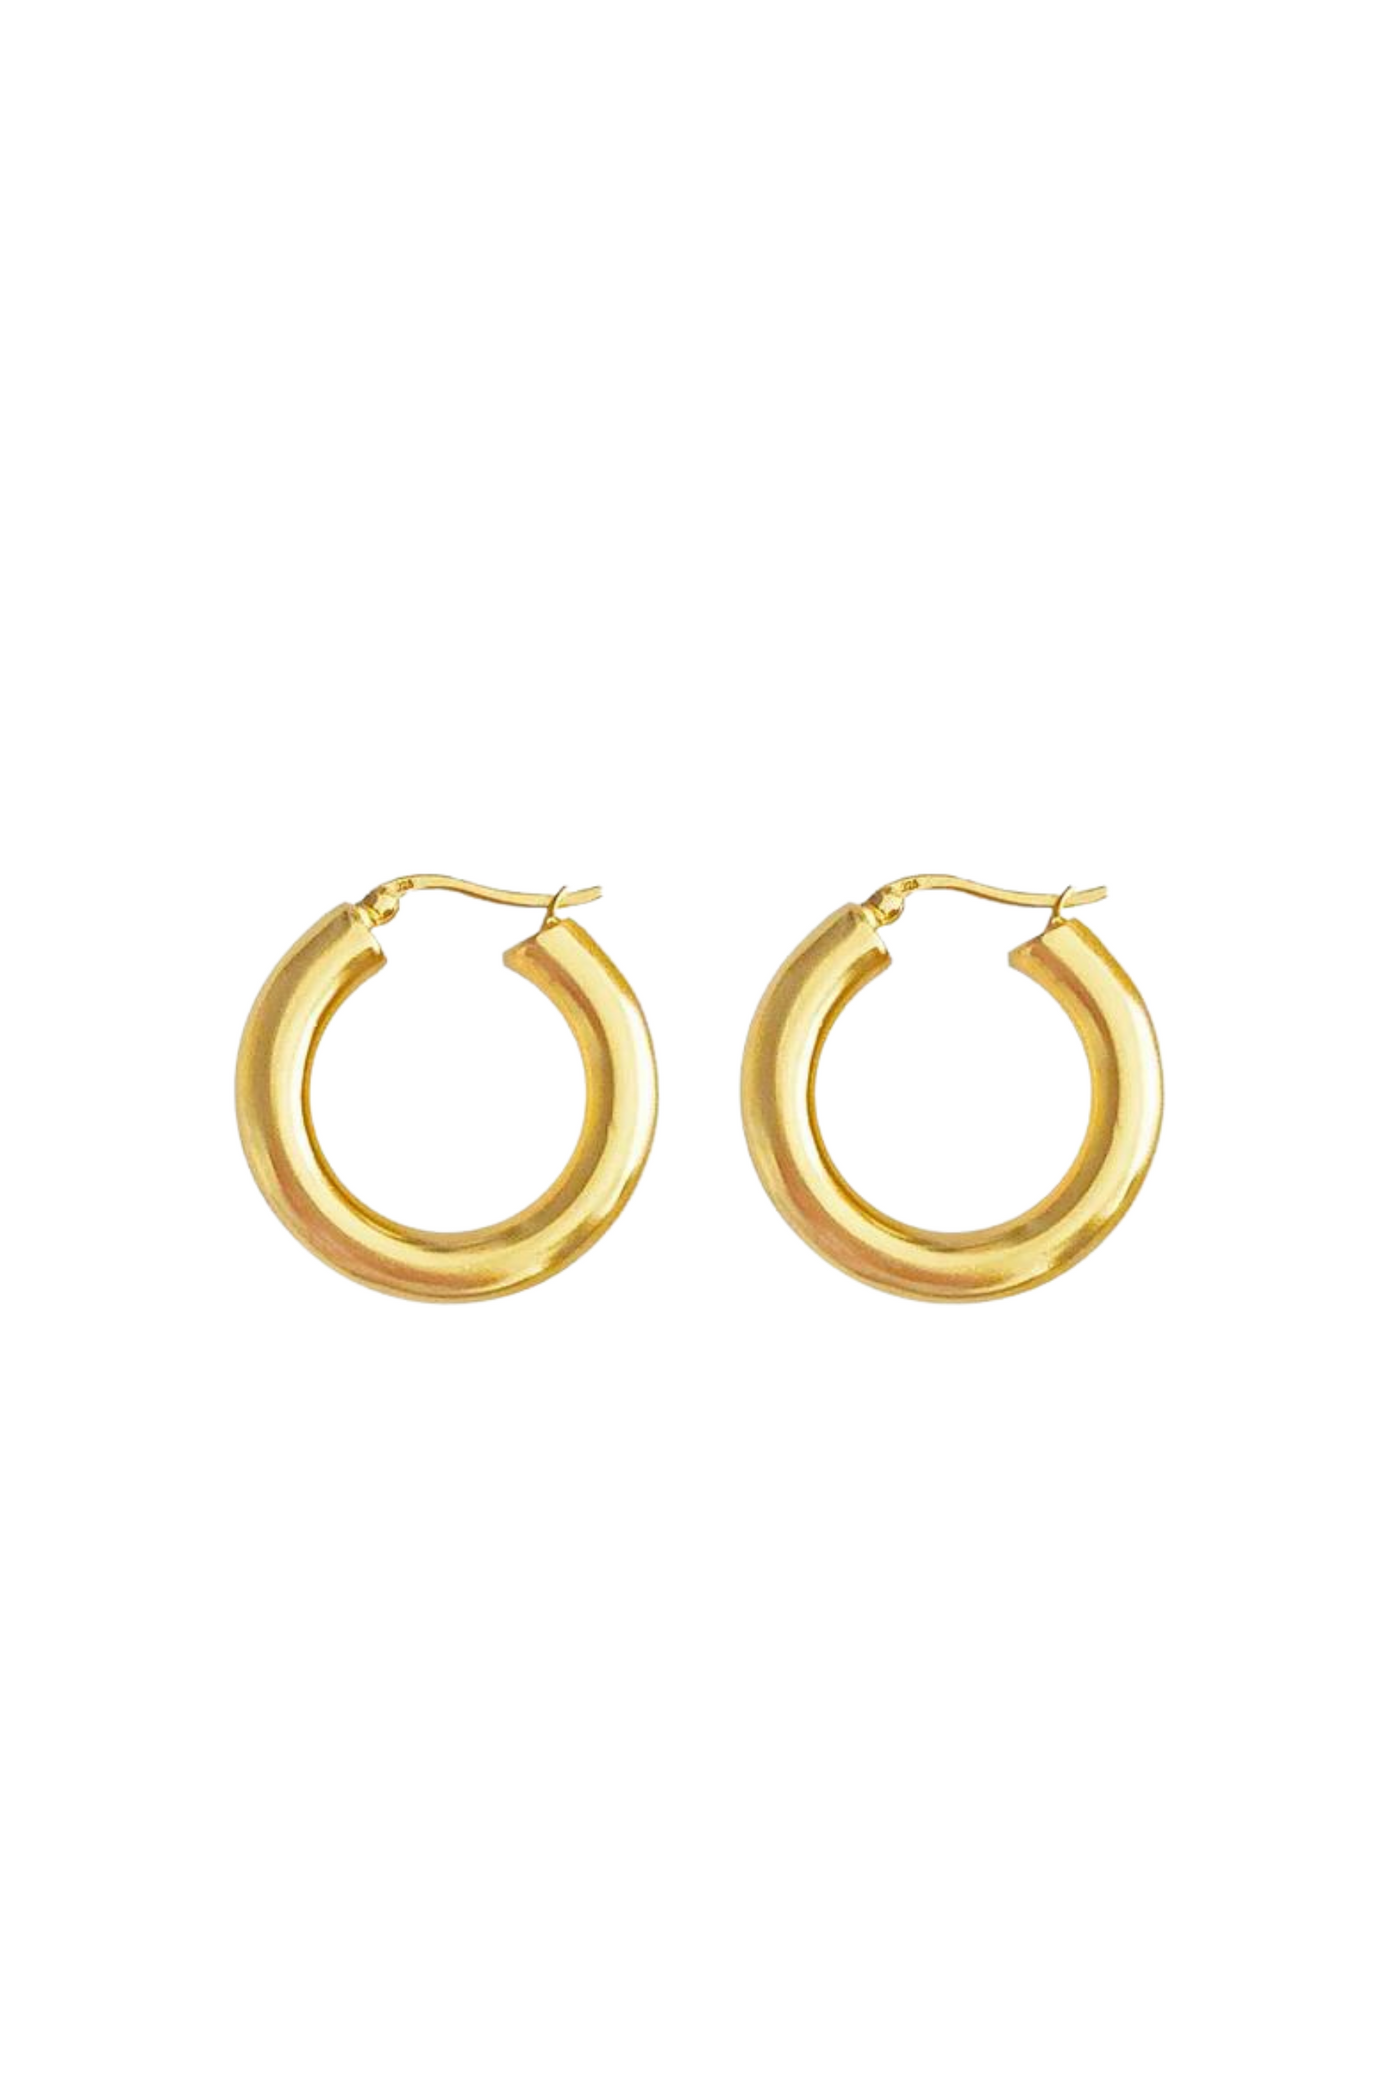 Pyar Jupiter Gold Hoop Earrings in Small, availbale on ZERRIN with free Singapore shipping